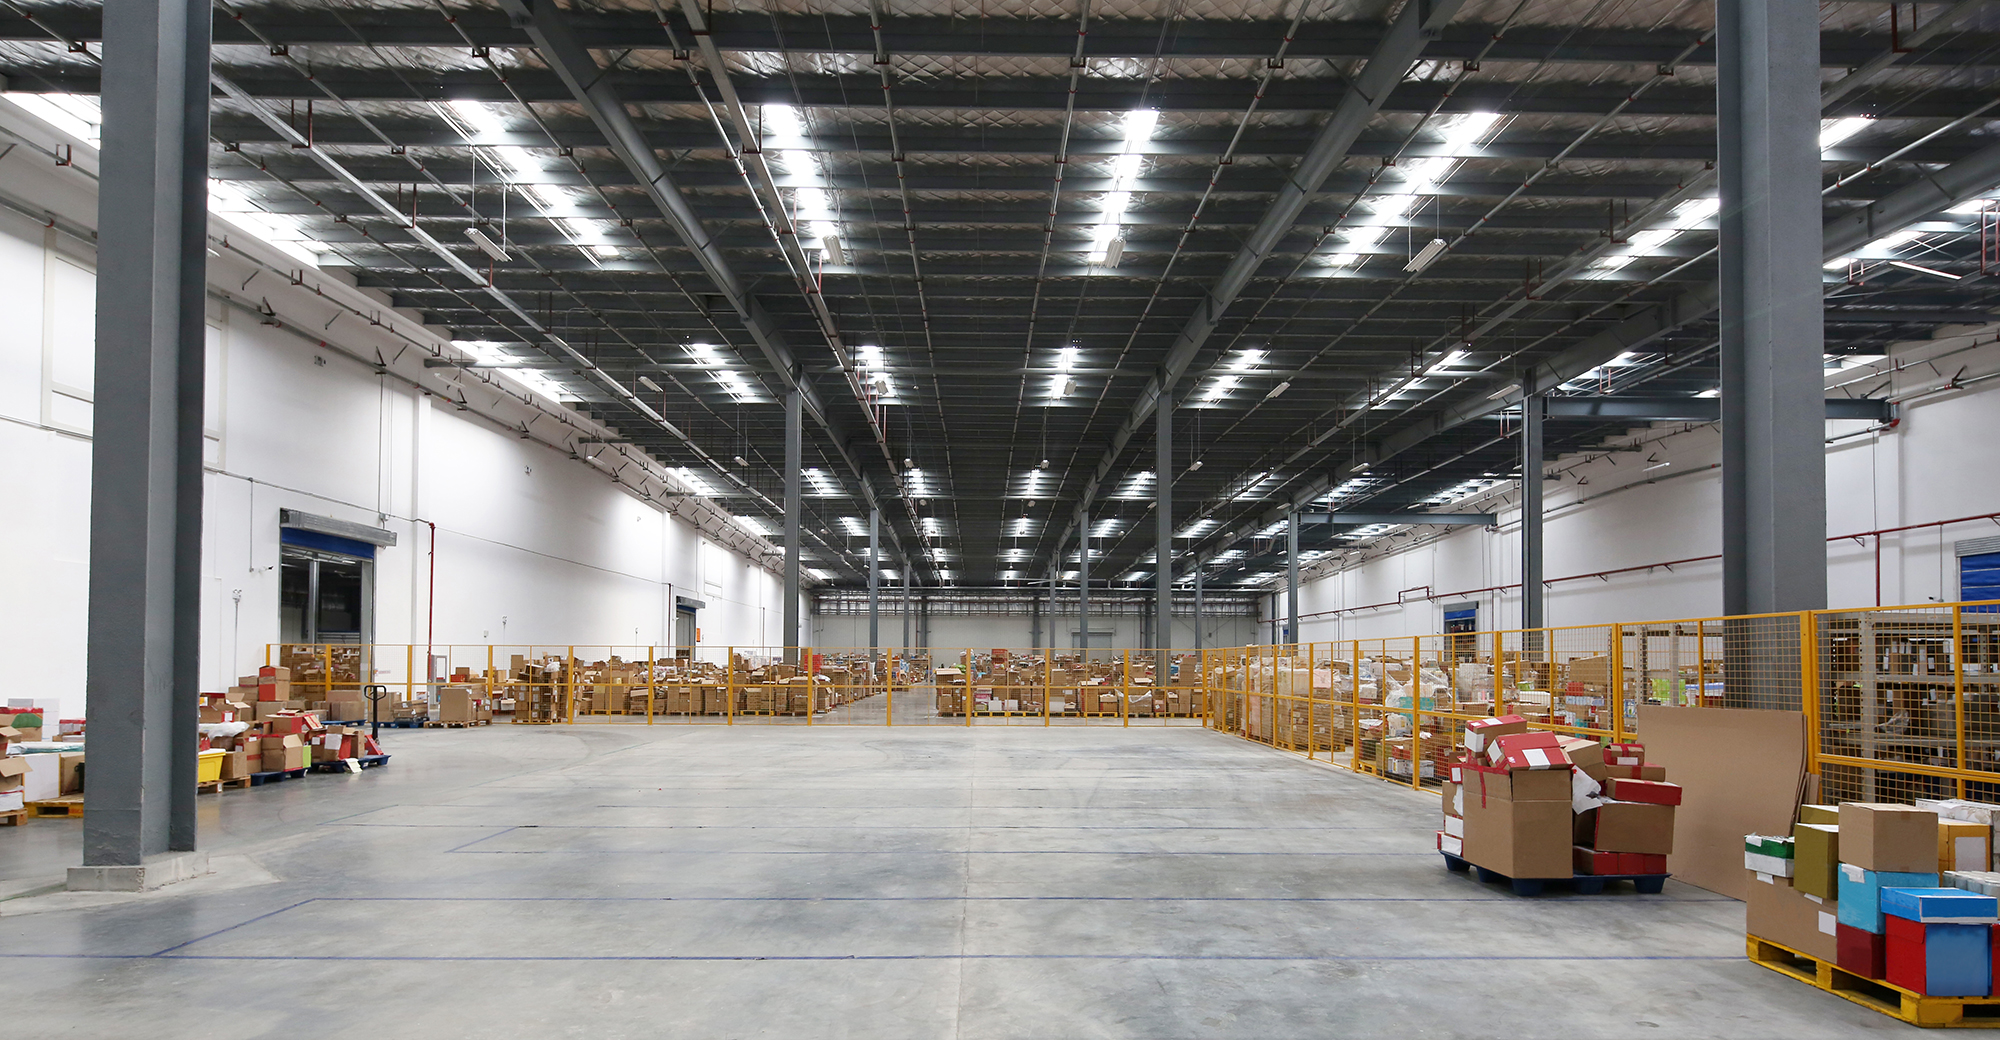 KKR to Build Warehouses as Demand for Space Outstrips Supply